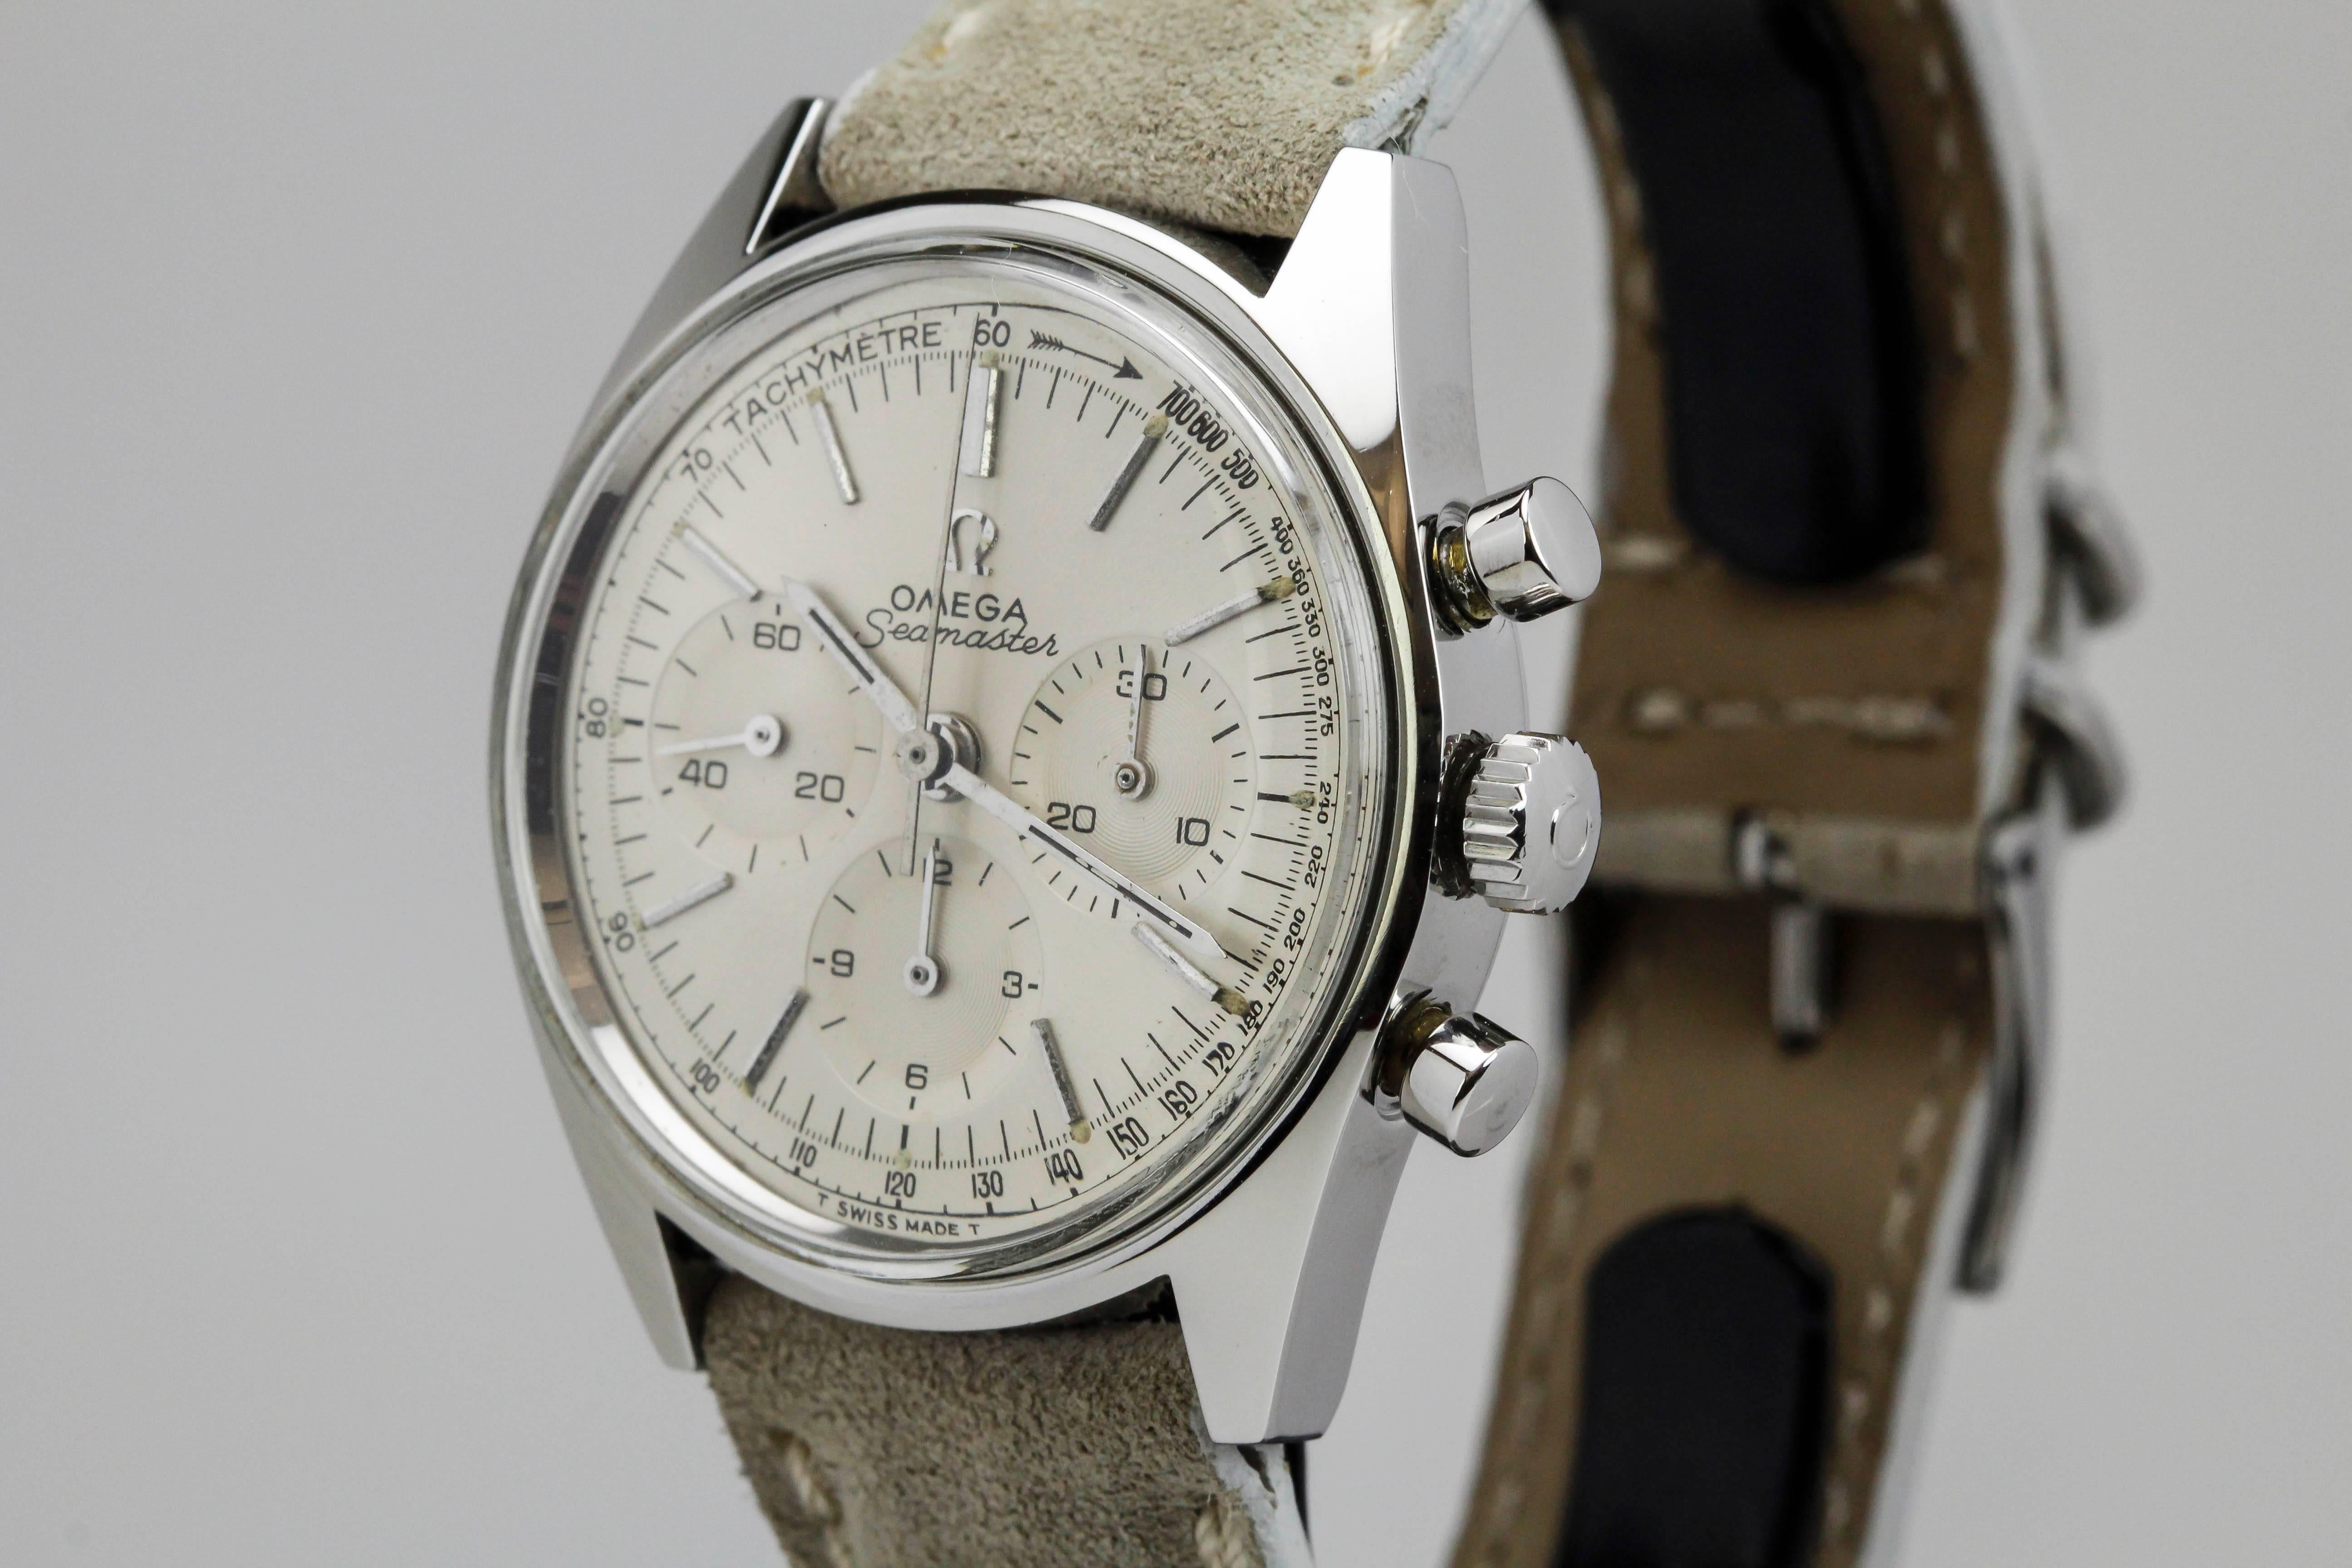 Omega Stainless Steel Seamaster Chronograph Wristwatch c. 1960's 2